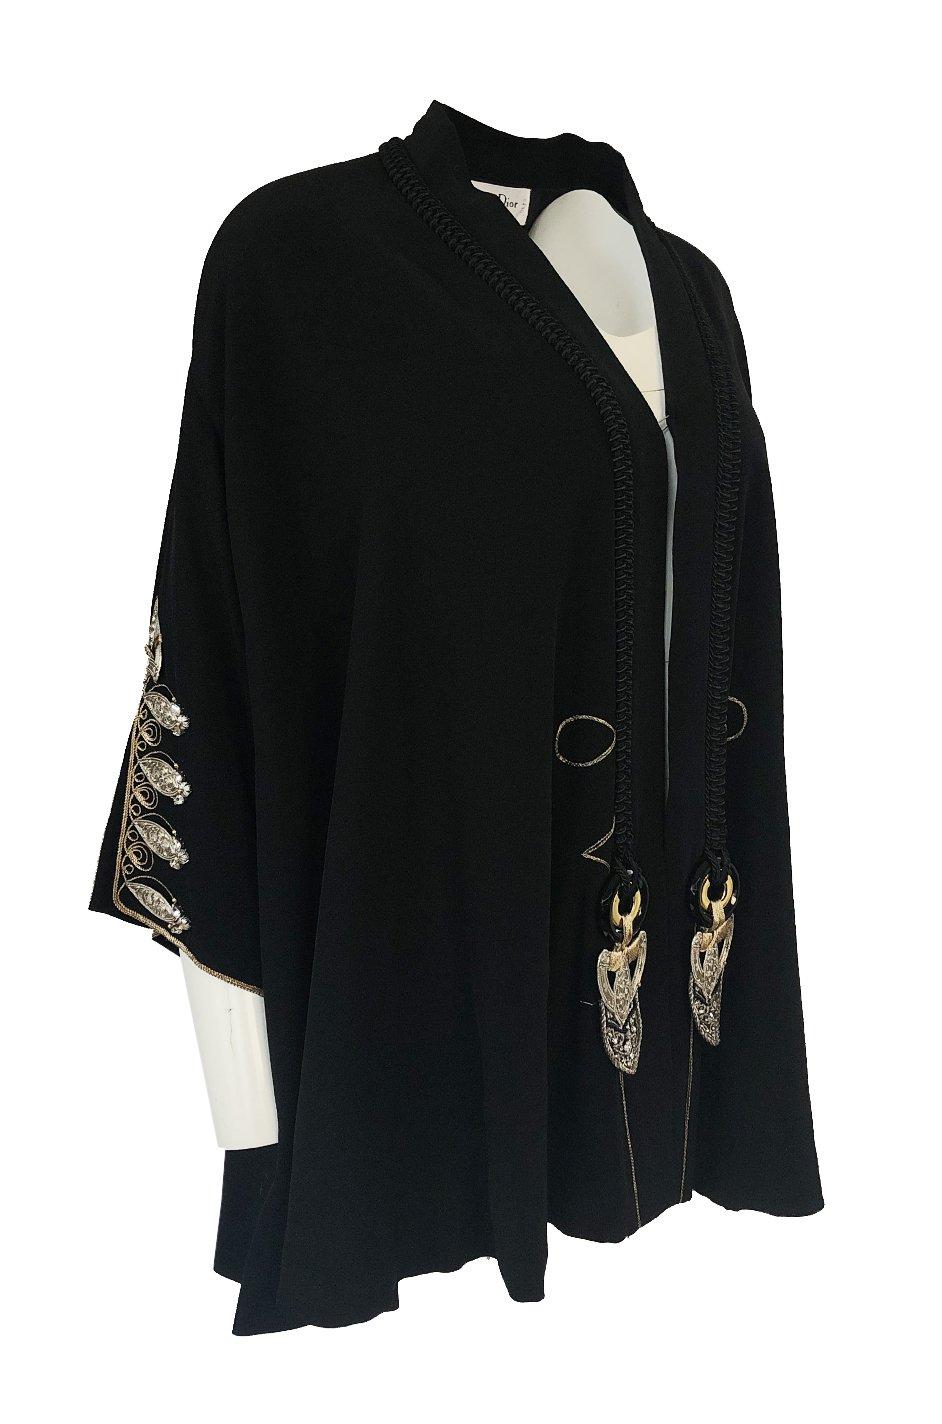 Black Spring 1994 Christian Dior by Gianfranco Ferre Jacket w Metal Accents